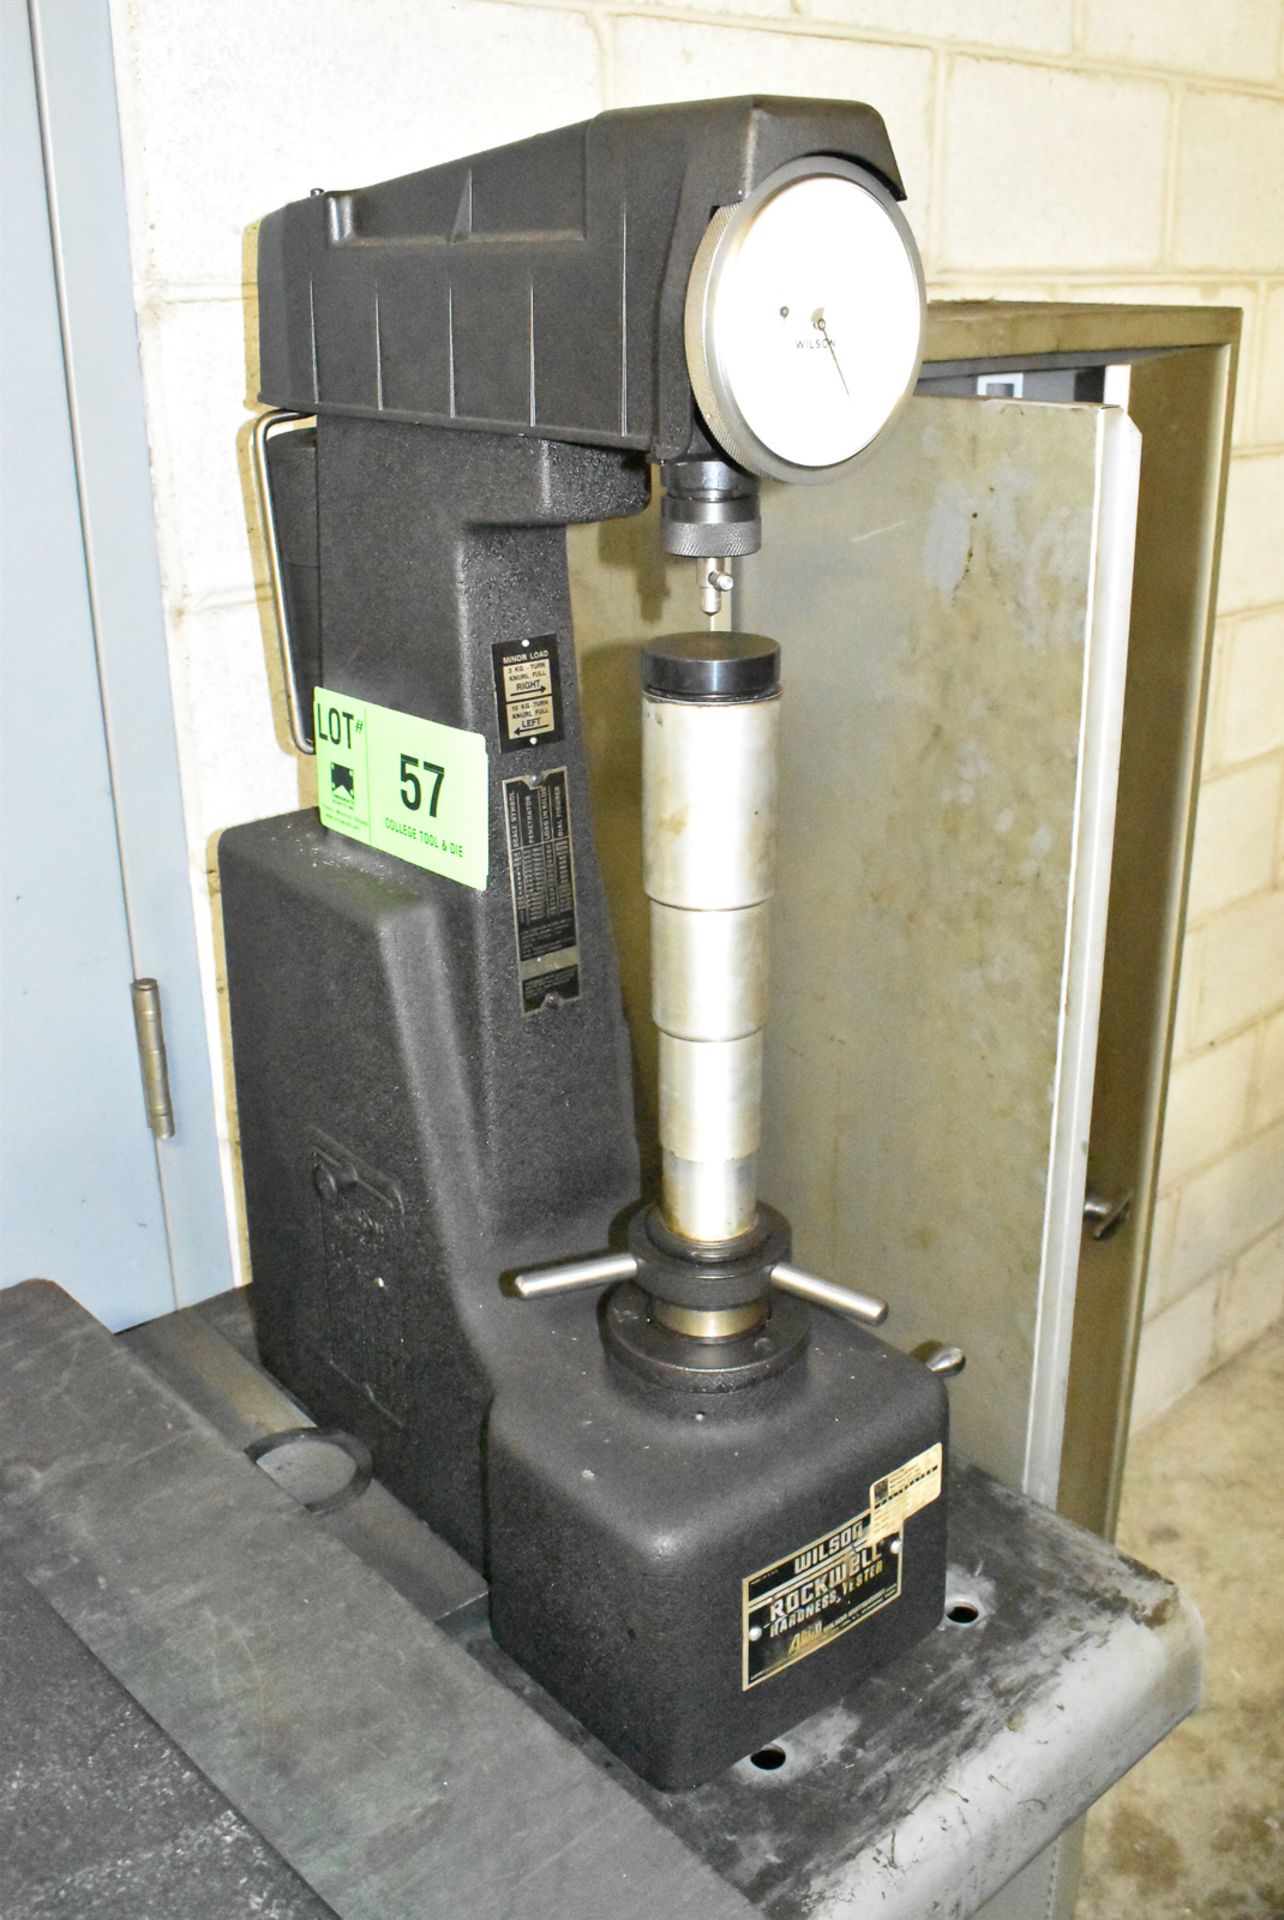 WILSON 4TT RB BENCH TYPE ROCKWELL HARDNESS TESTER WITH STAND AND STANDARDS, S/N 1931